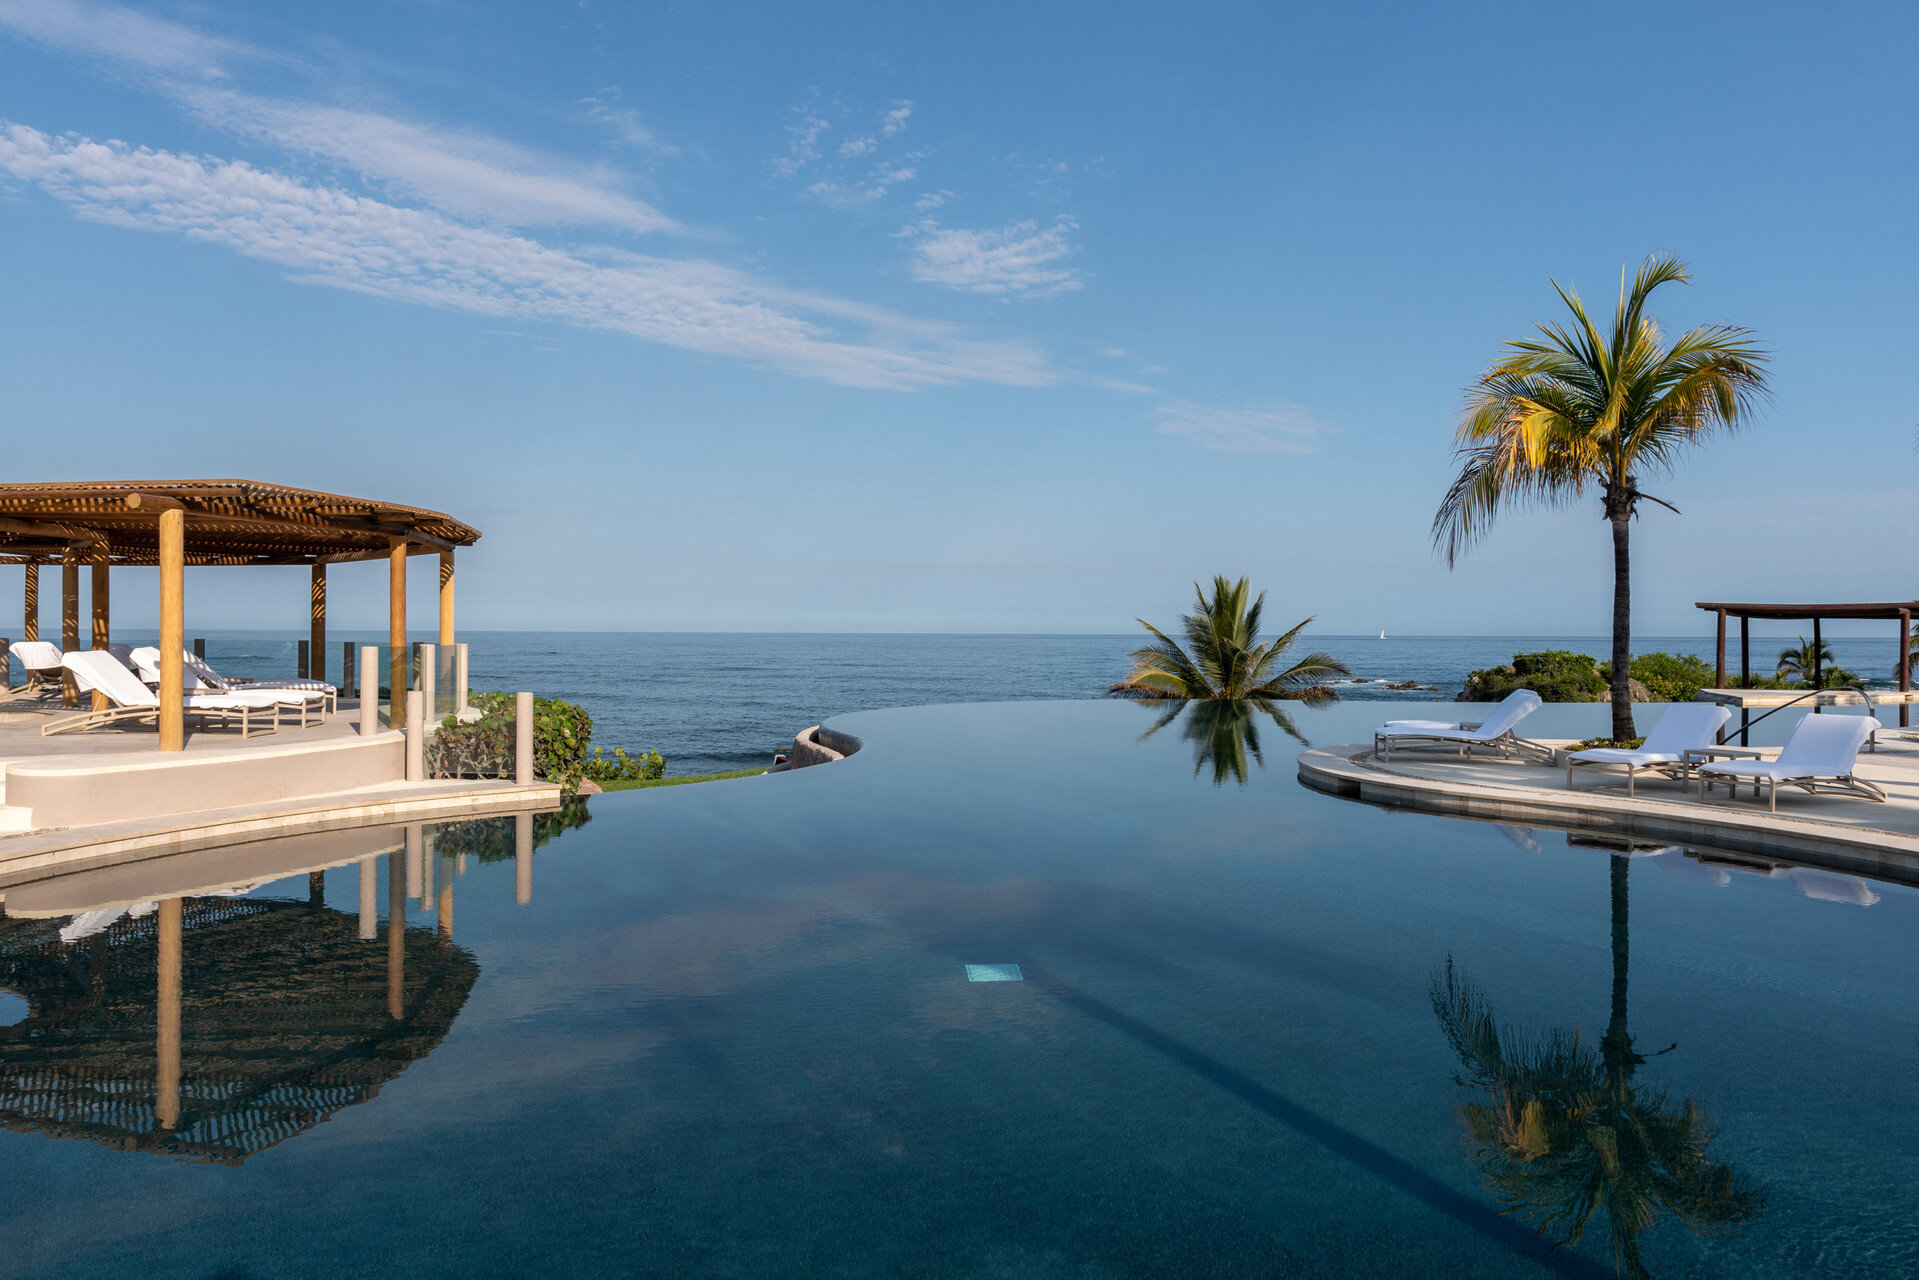   Infinity pool with views out onto Banderas Bay (photo credit: Four Seasons)  